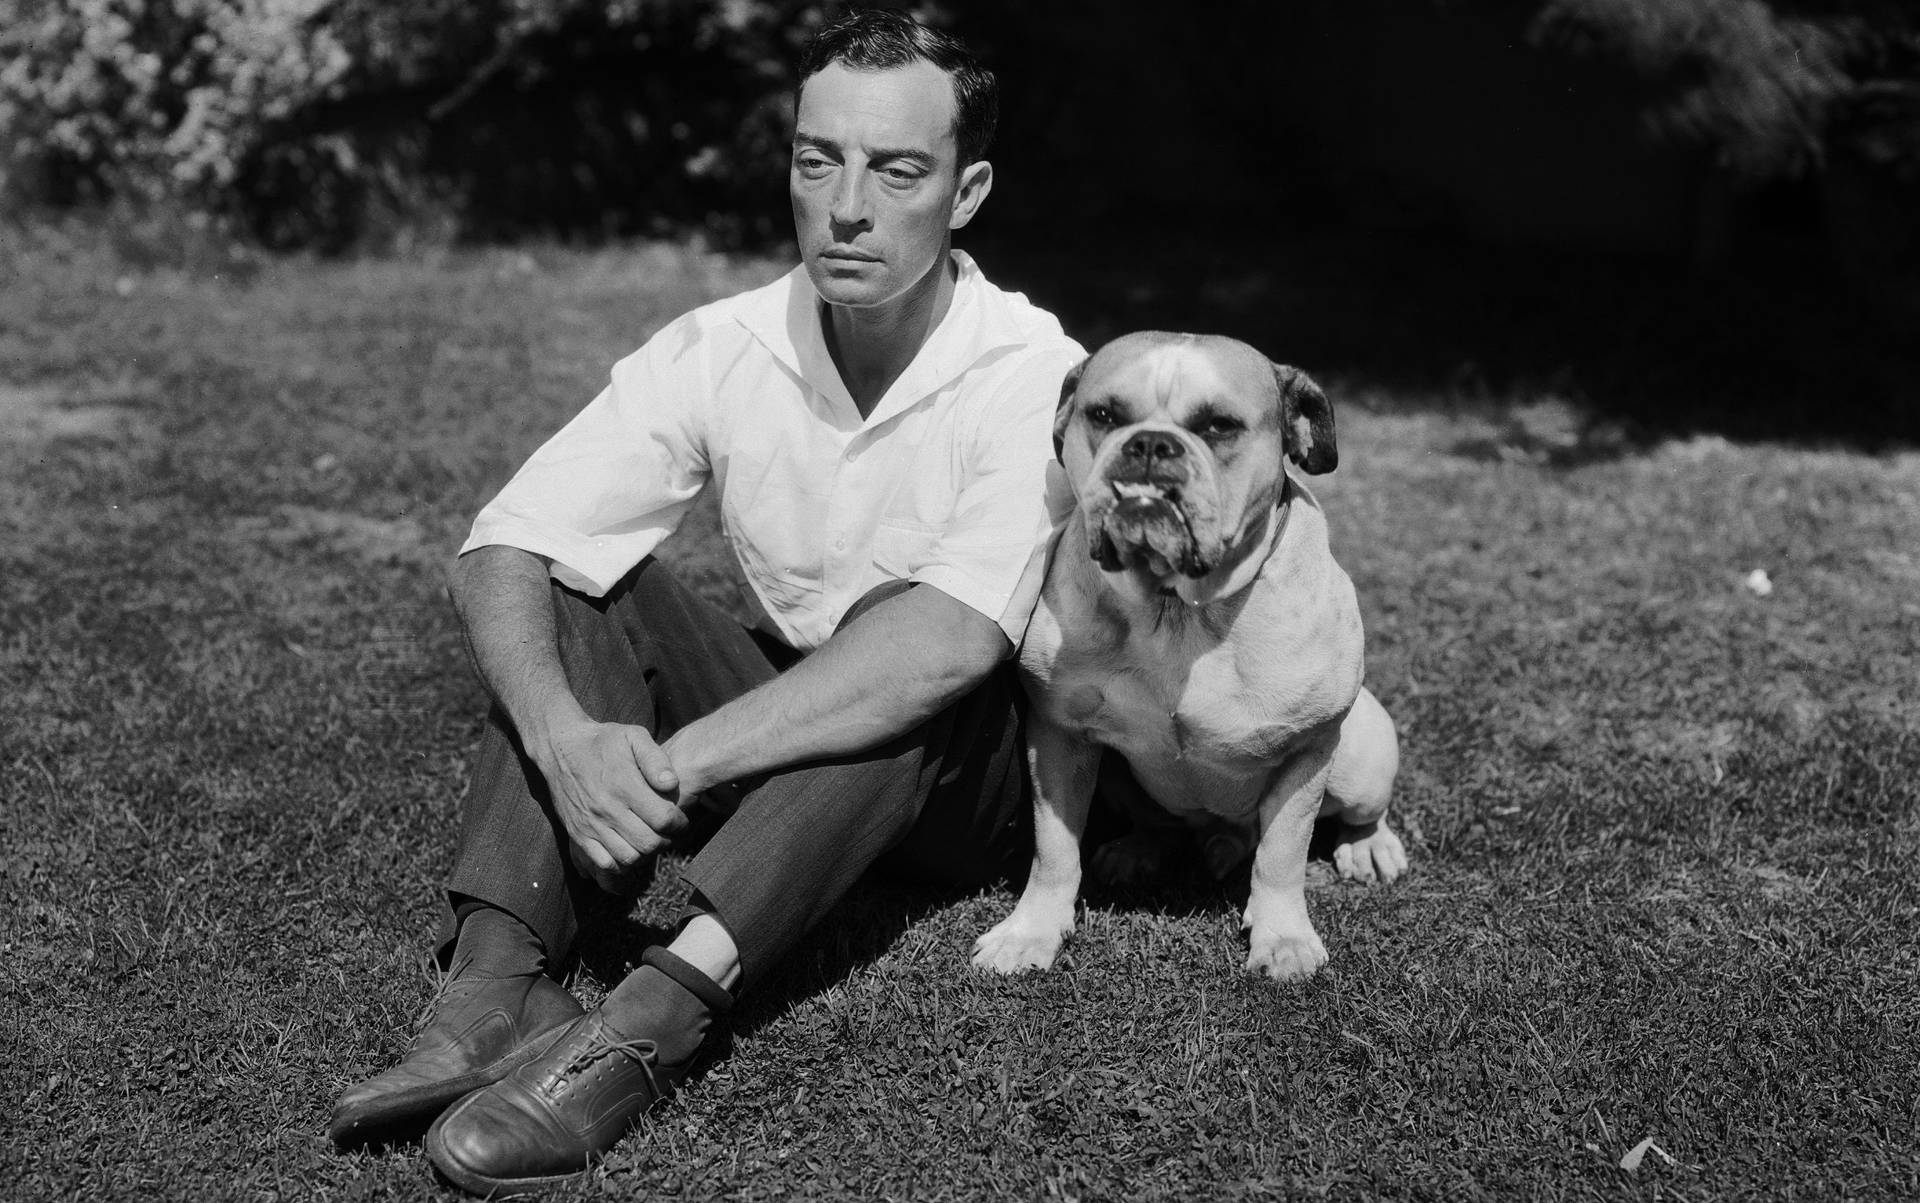 Buster Keaton with his loyal sidekick dog in a vintage setting. Wallpaper